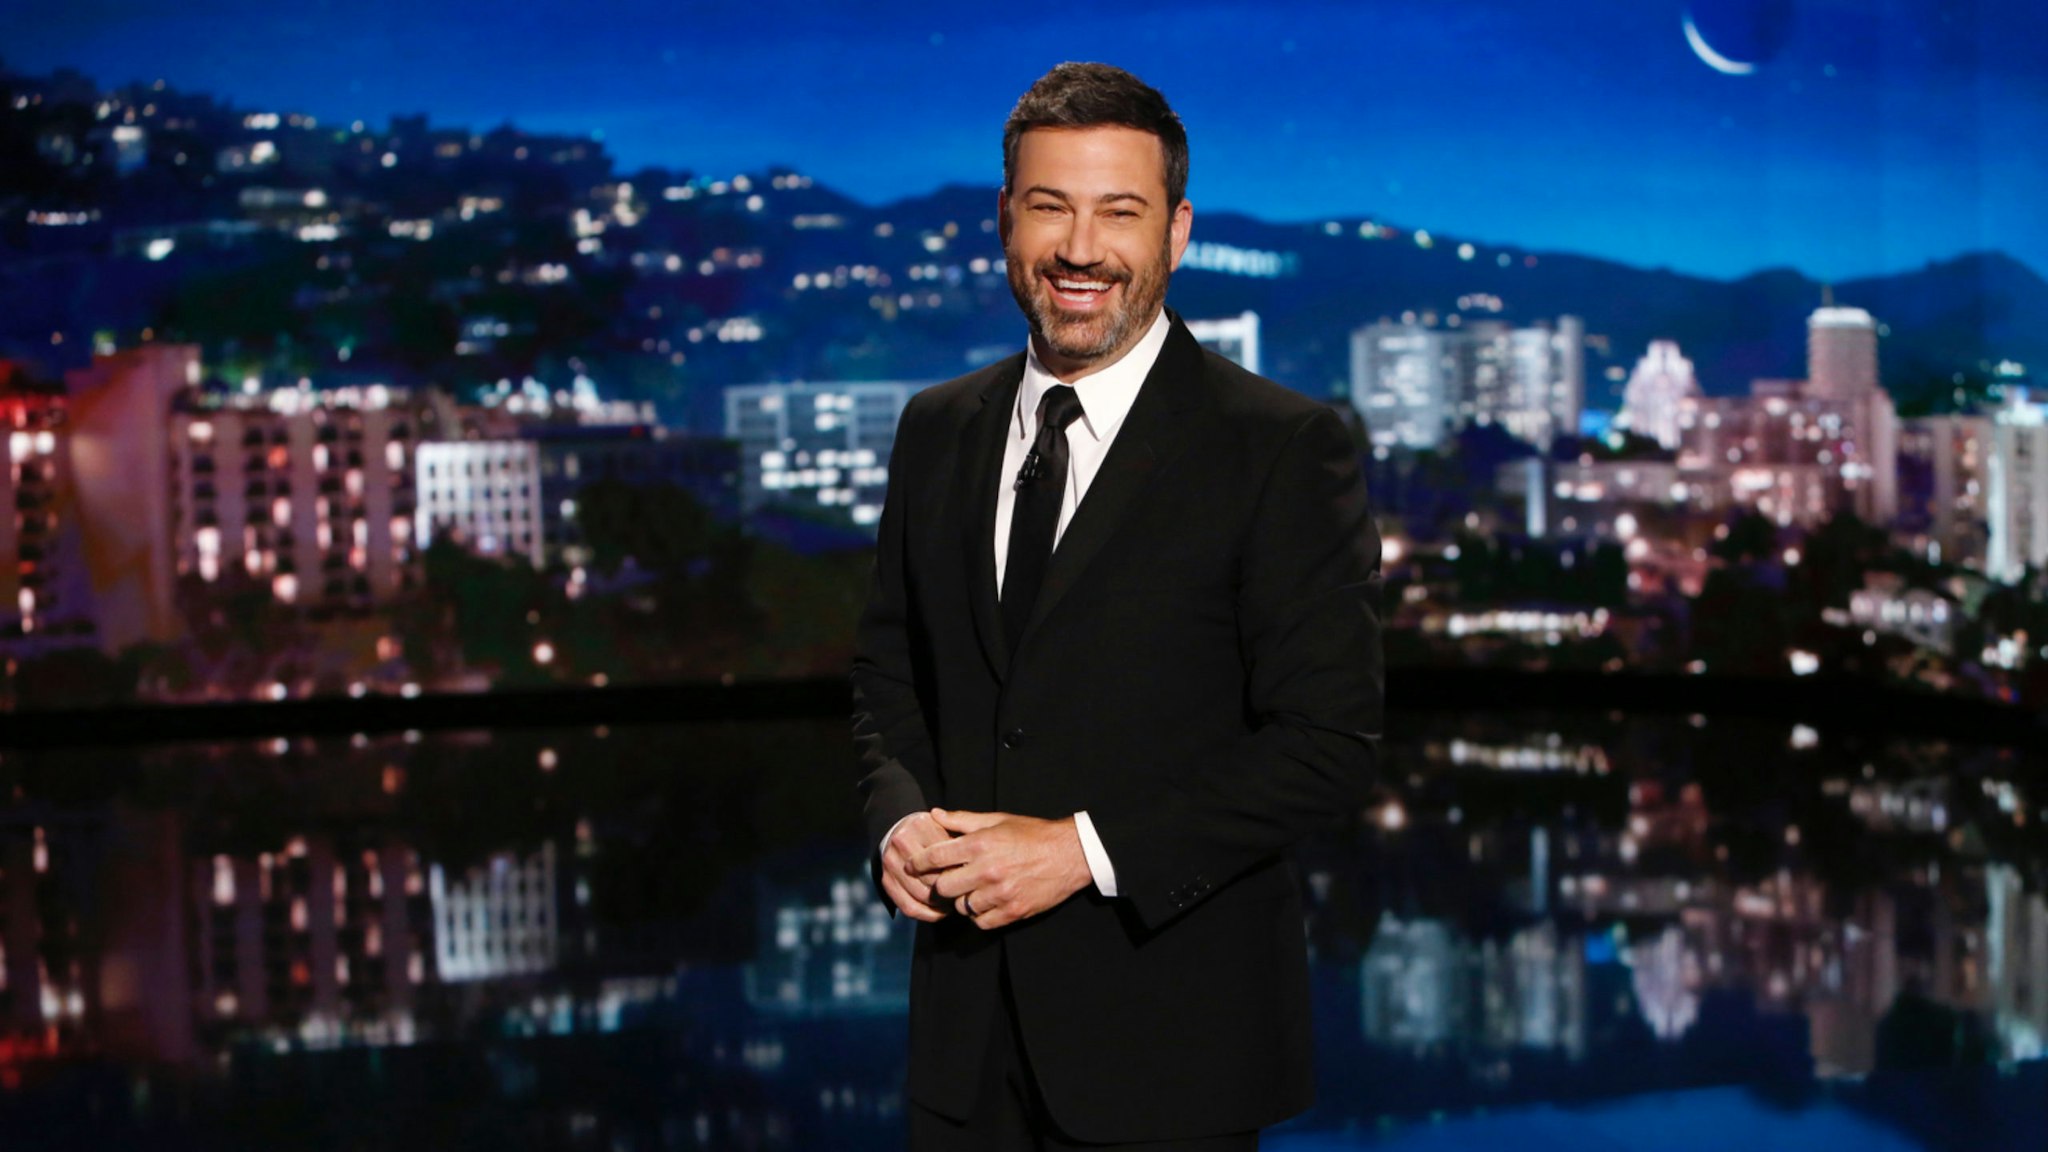 "Jimmy Kimmel Live" airs every weeknight at 11:35 p.m. EST and features a diverse lineup of guests that includes celebrities, athletes, musical acts, comedians and human-interest subjects, along with comedy bits and a house band.